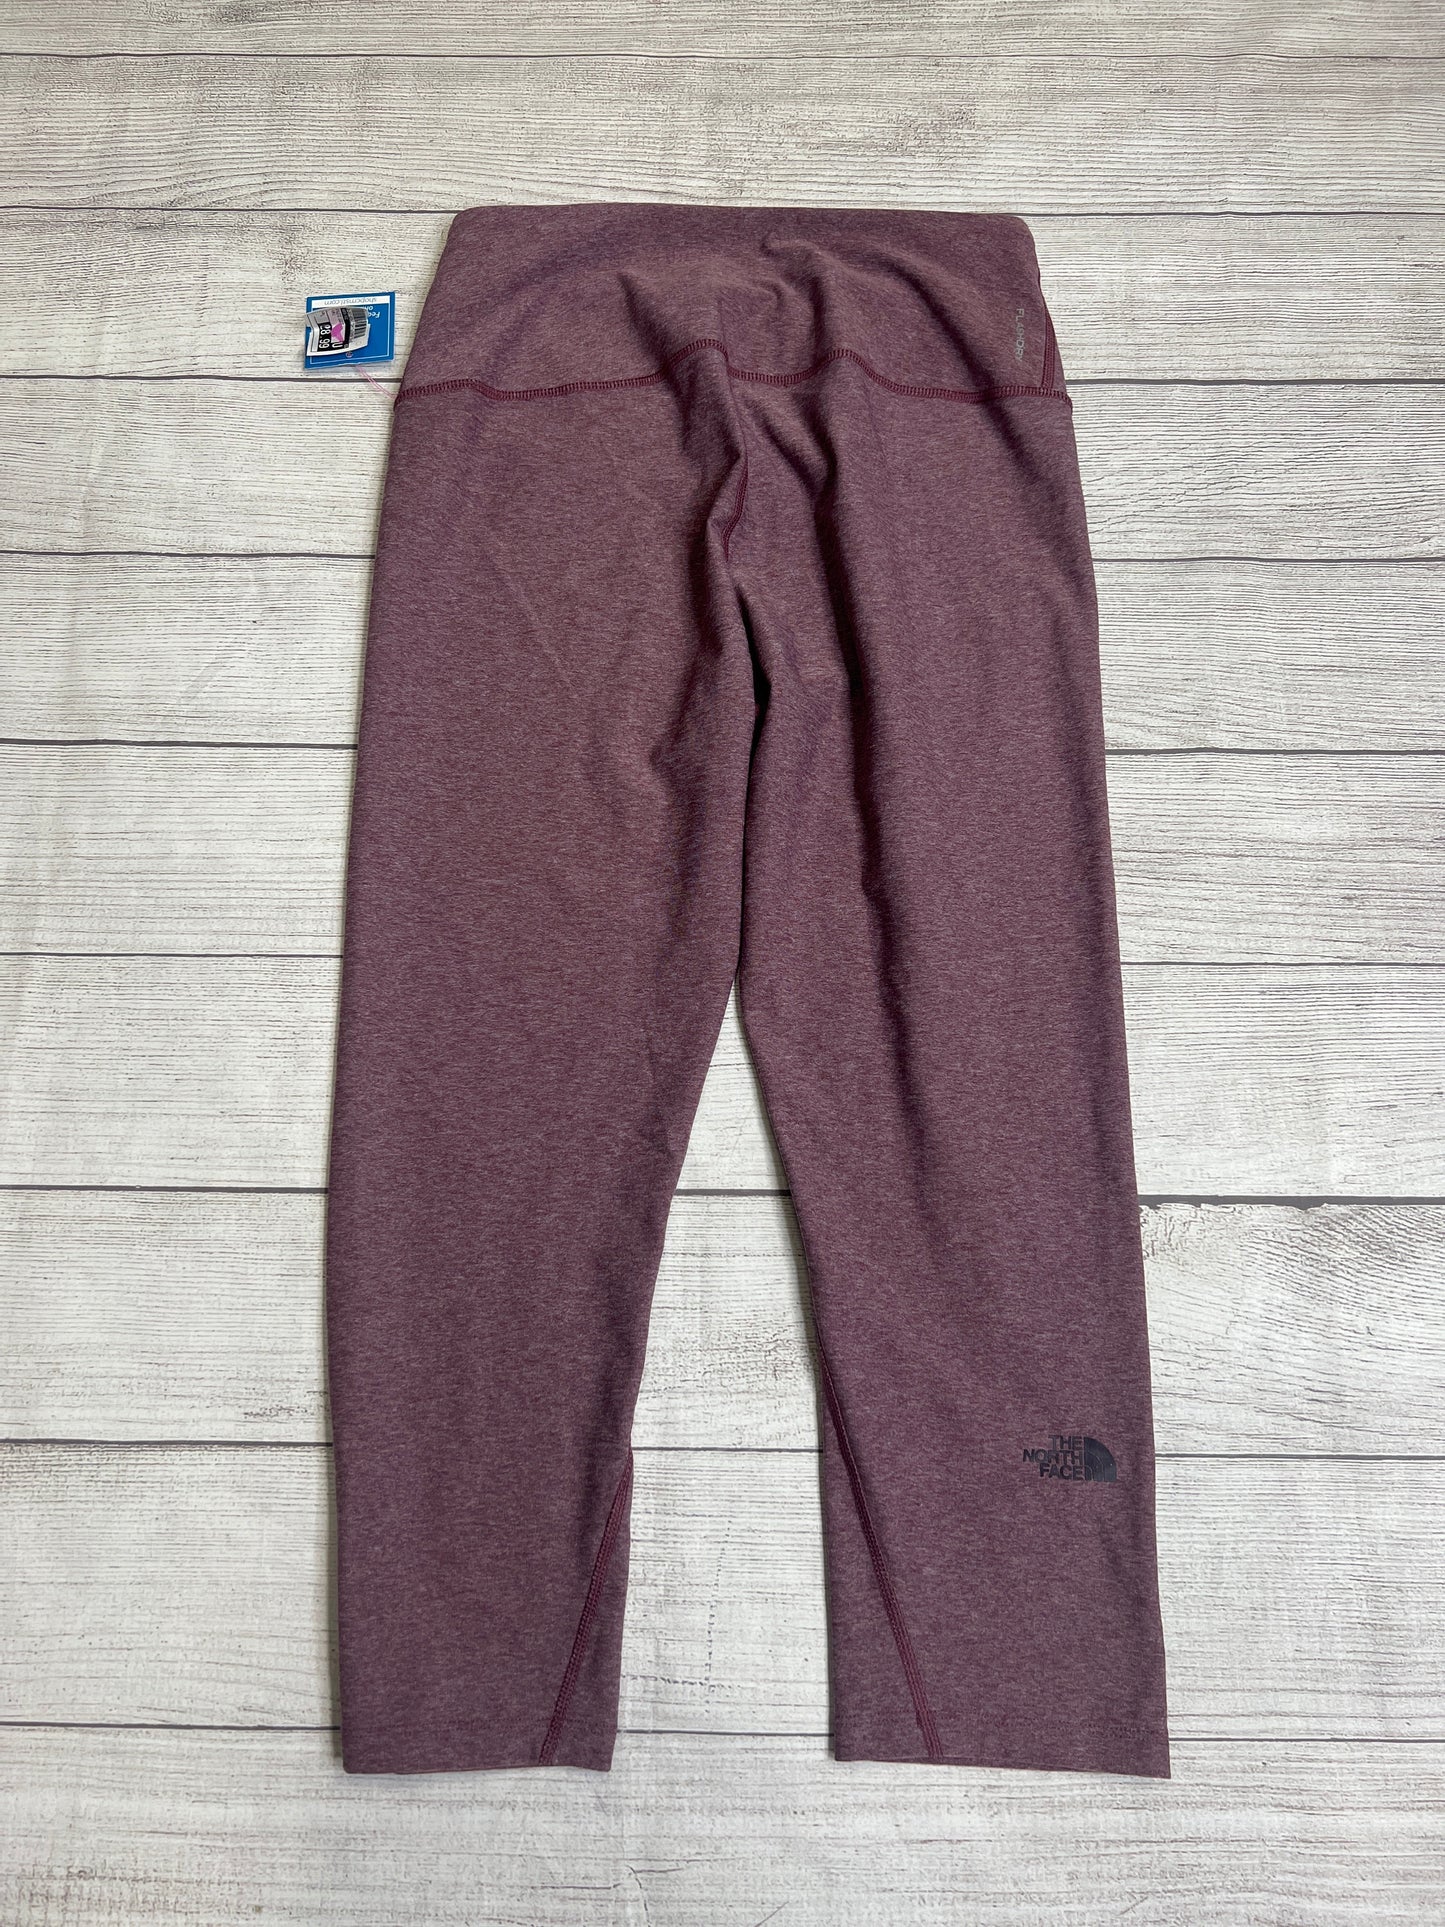 Athletic Cropped/Capri Leggings By The North Face  Size: L